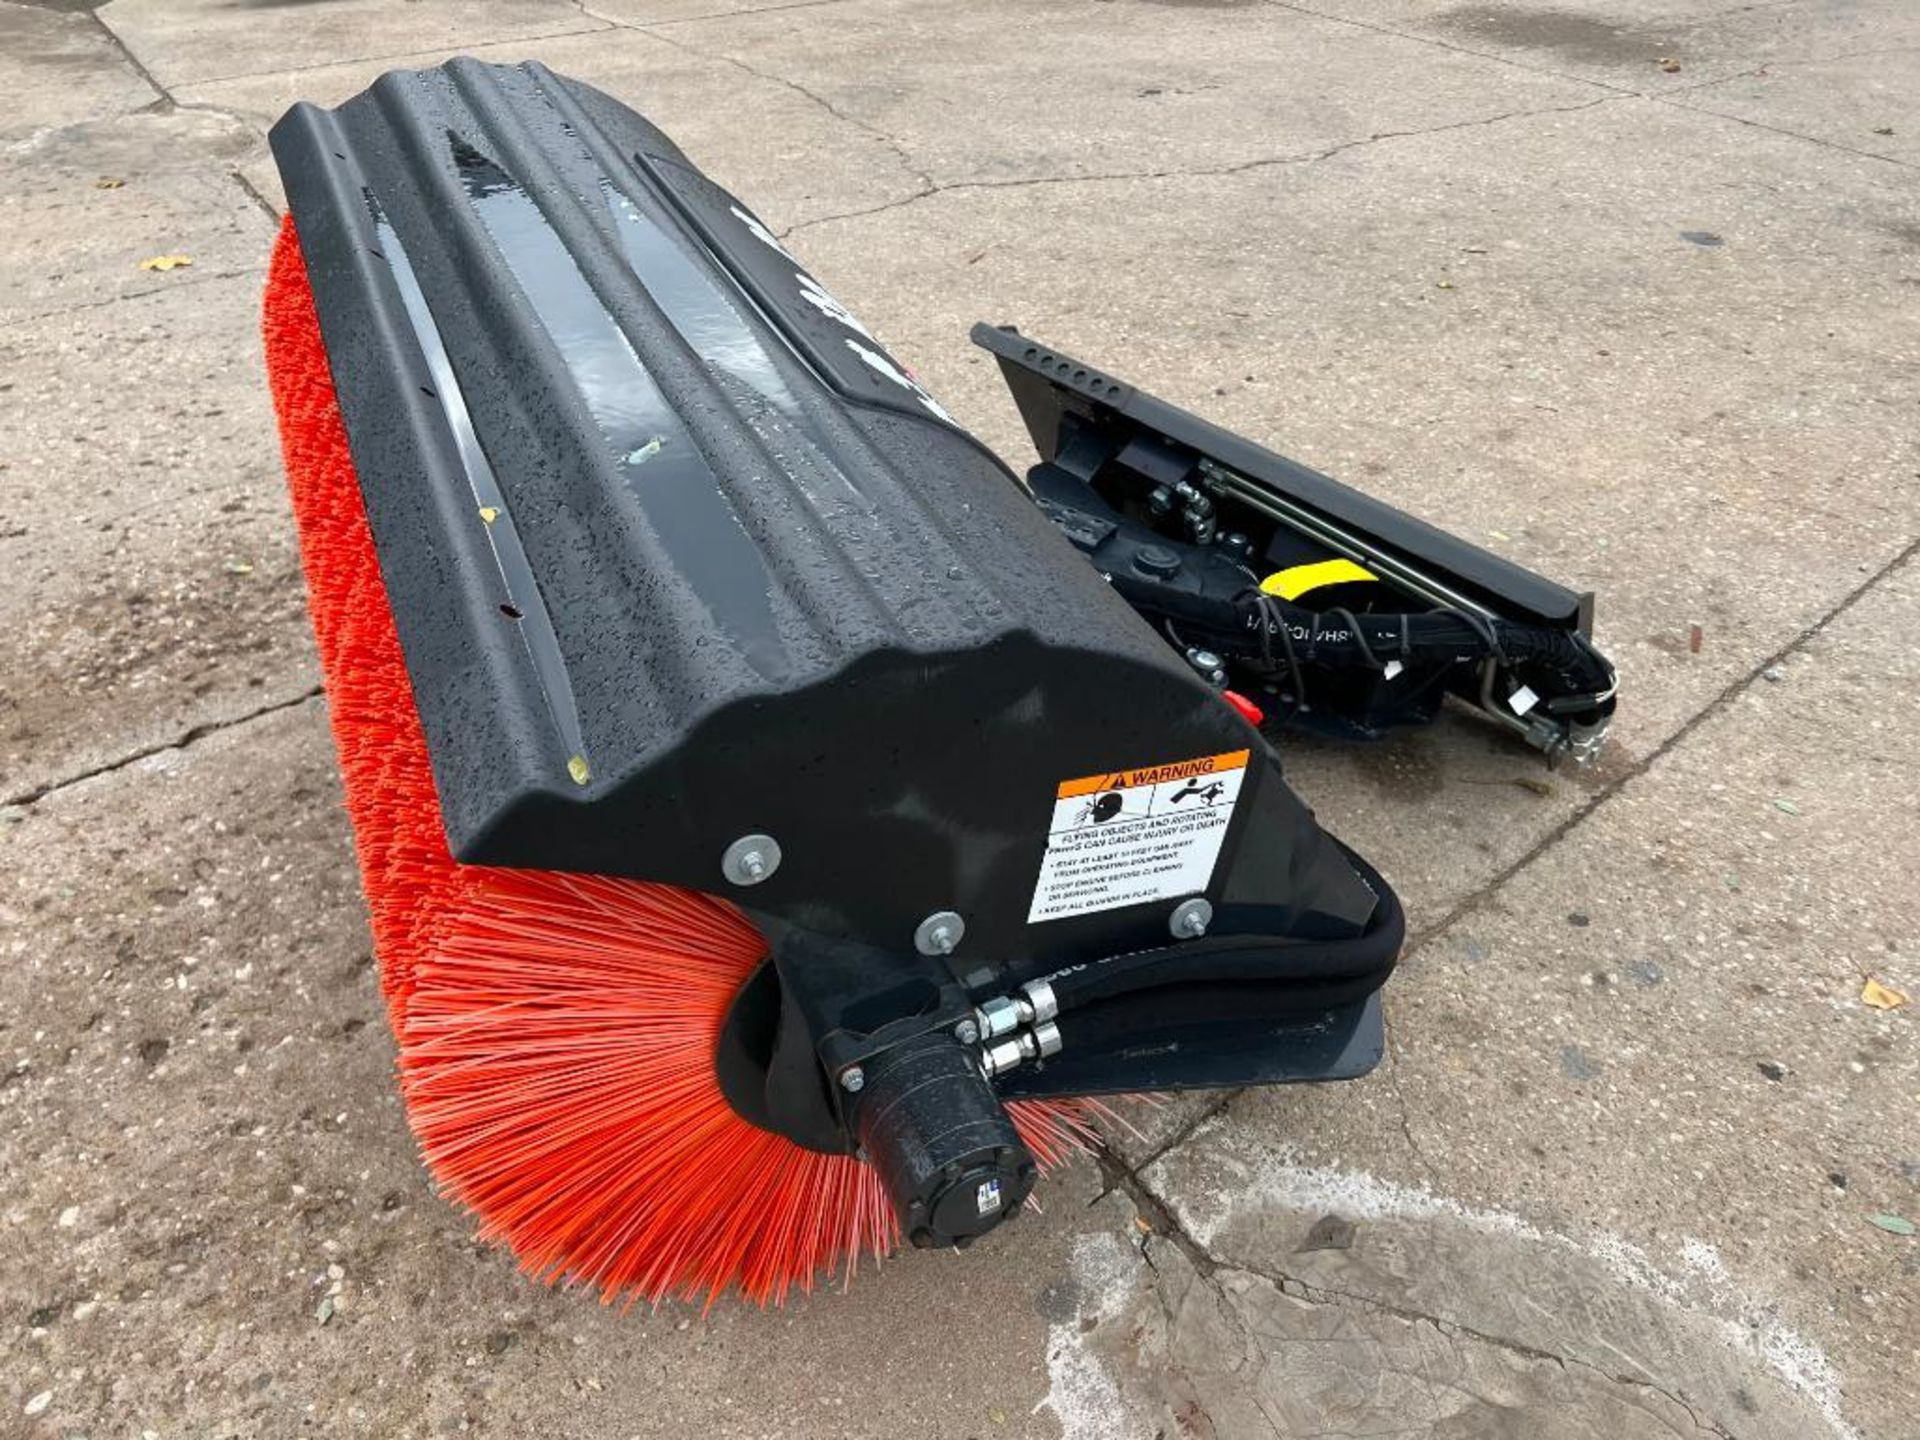 2019 Bobcat Angle Broom Attachment, Model #68, Serial #B4KZ00627, Hydraulically Driven Angle Broom, - Image 4 of 6